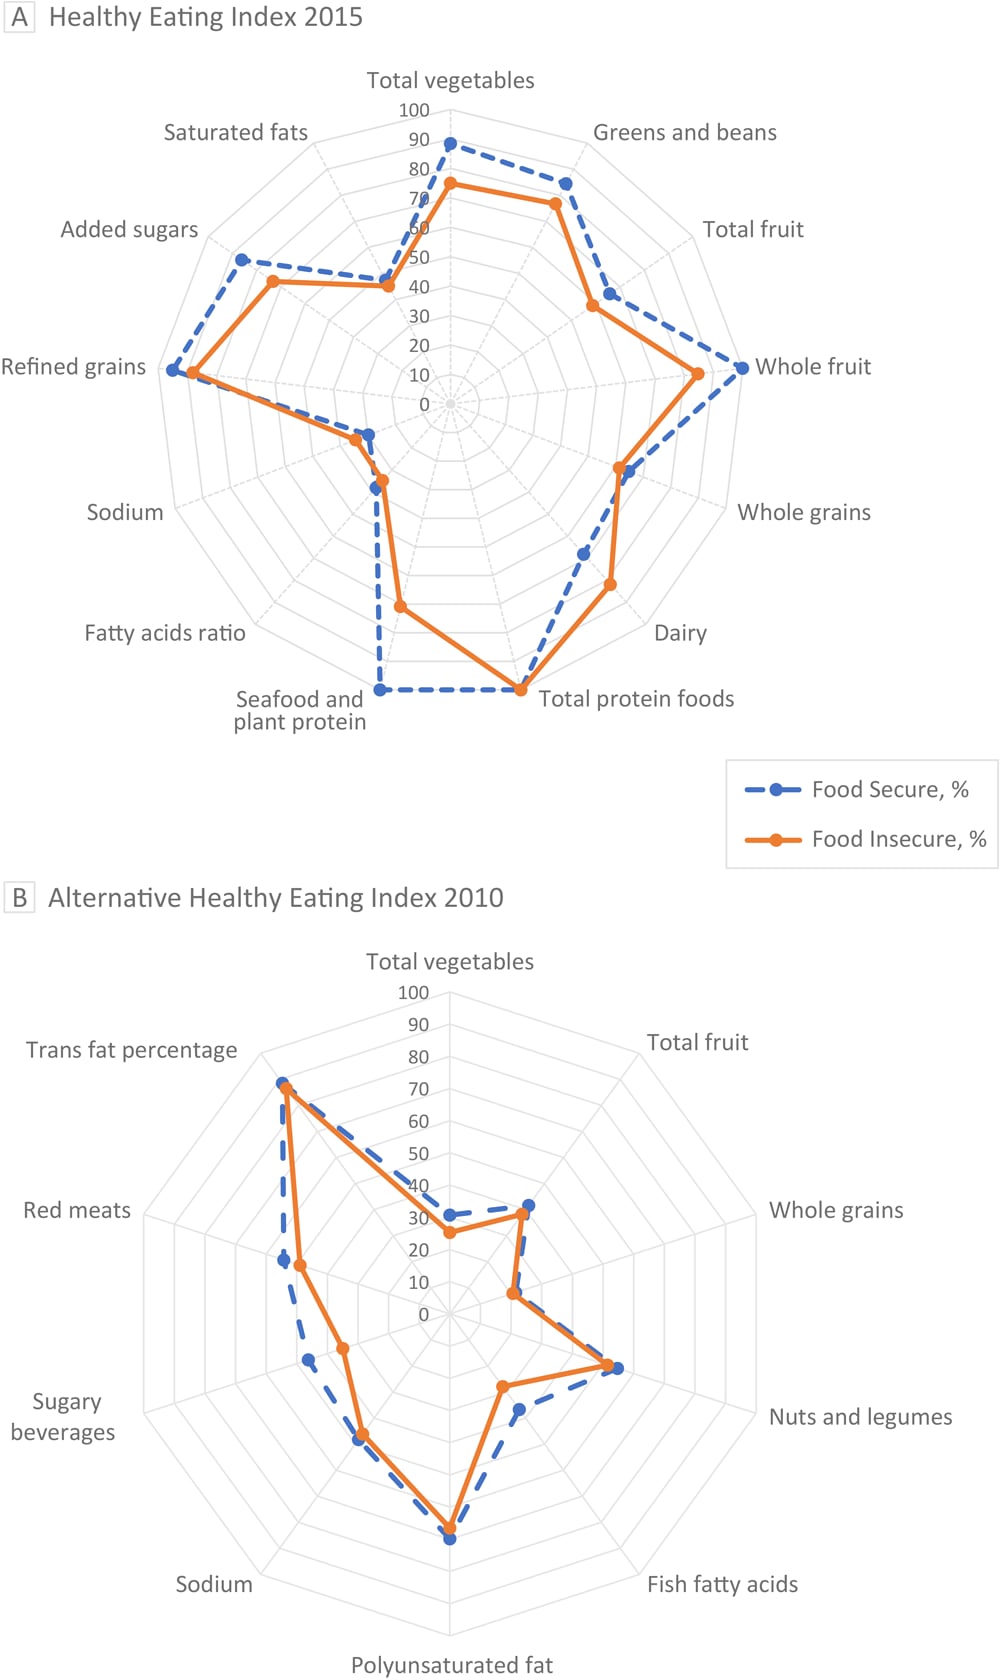 Radar plots of Healthy Eating Index (HEI) 2015 and Alternative Healthy Eating Index (AHEI) 2010 food components for both food secure and food insecure early childhood education providers. The radial axes represent median scores for food components graphed as percentages of each component’s total maximum score. The radar plots’ outer edges represent a maximum score of 100&#37;, while the centers represent a minimum score of 0&#37;. Plot A illustrates trends from HEI-2015. Total fruit represents all forms of fruit, including fruit juice; whole fruit represents all forms of fruit except fruit juice. Plot B illustrates trends from AHEI-2010. The median score for food secure was 53.1. For food insecure, the median score was 49.4. A higher score indicates a higher diet quality. Sugary beverages are any beverage with natural or added sugar.